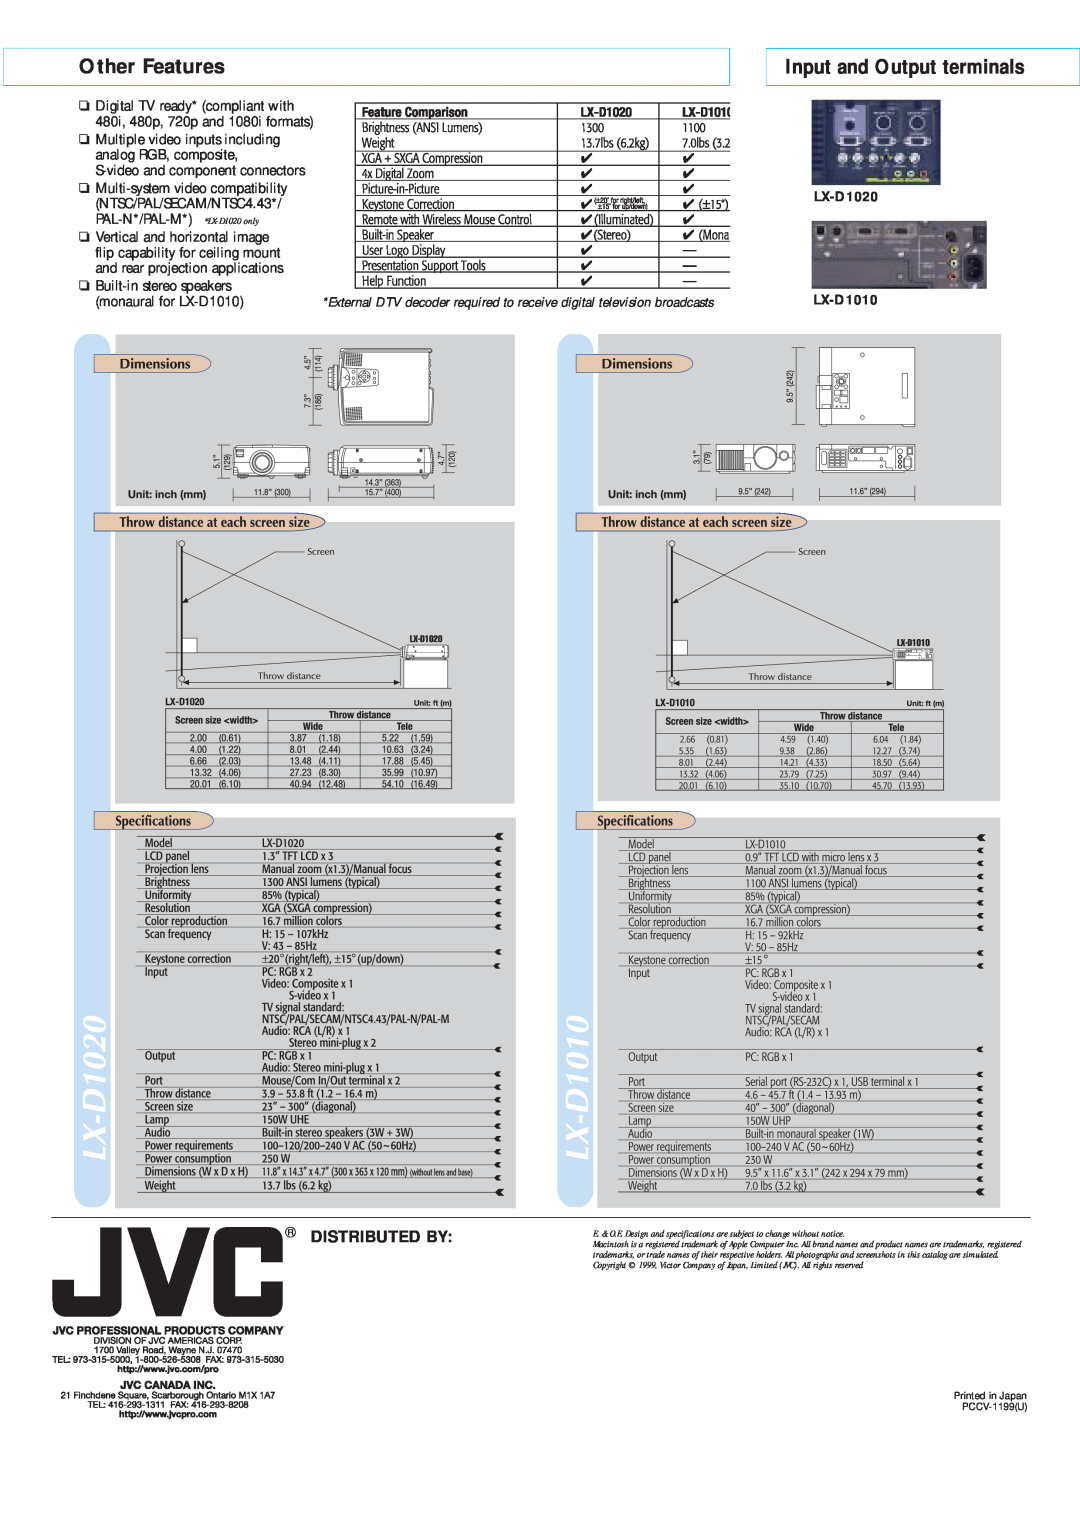 JVC LX-D1020 Other Features, Input and Output terminals, R Distributed By, LX-D1010, S-video and component connectors 